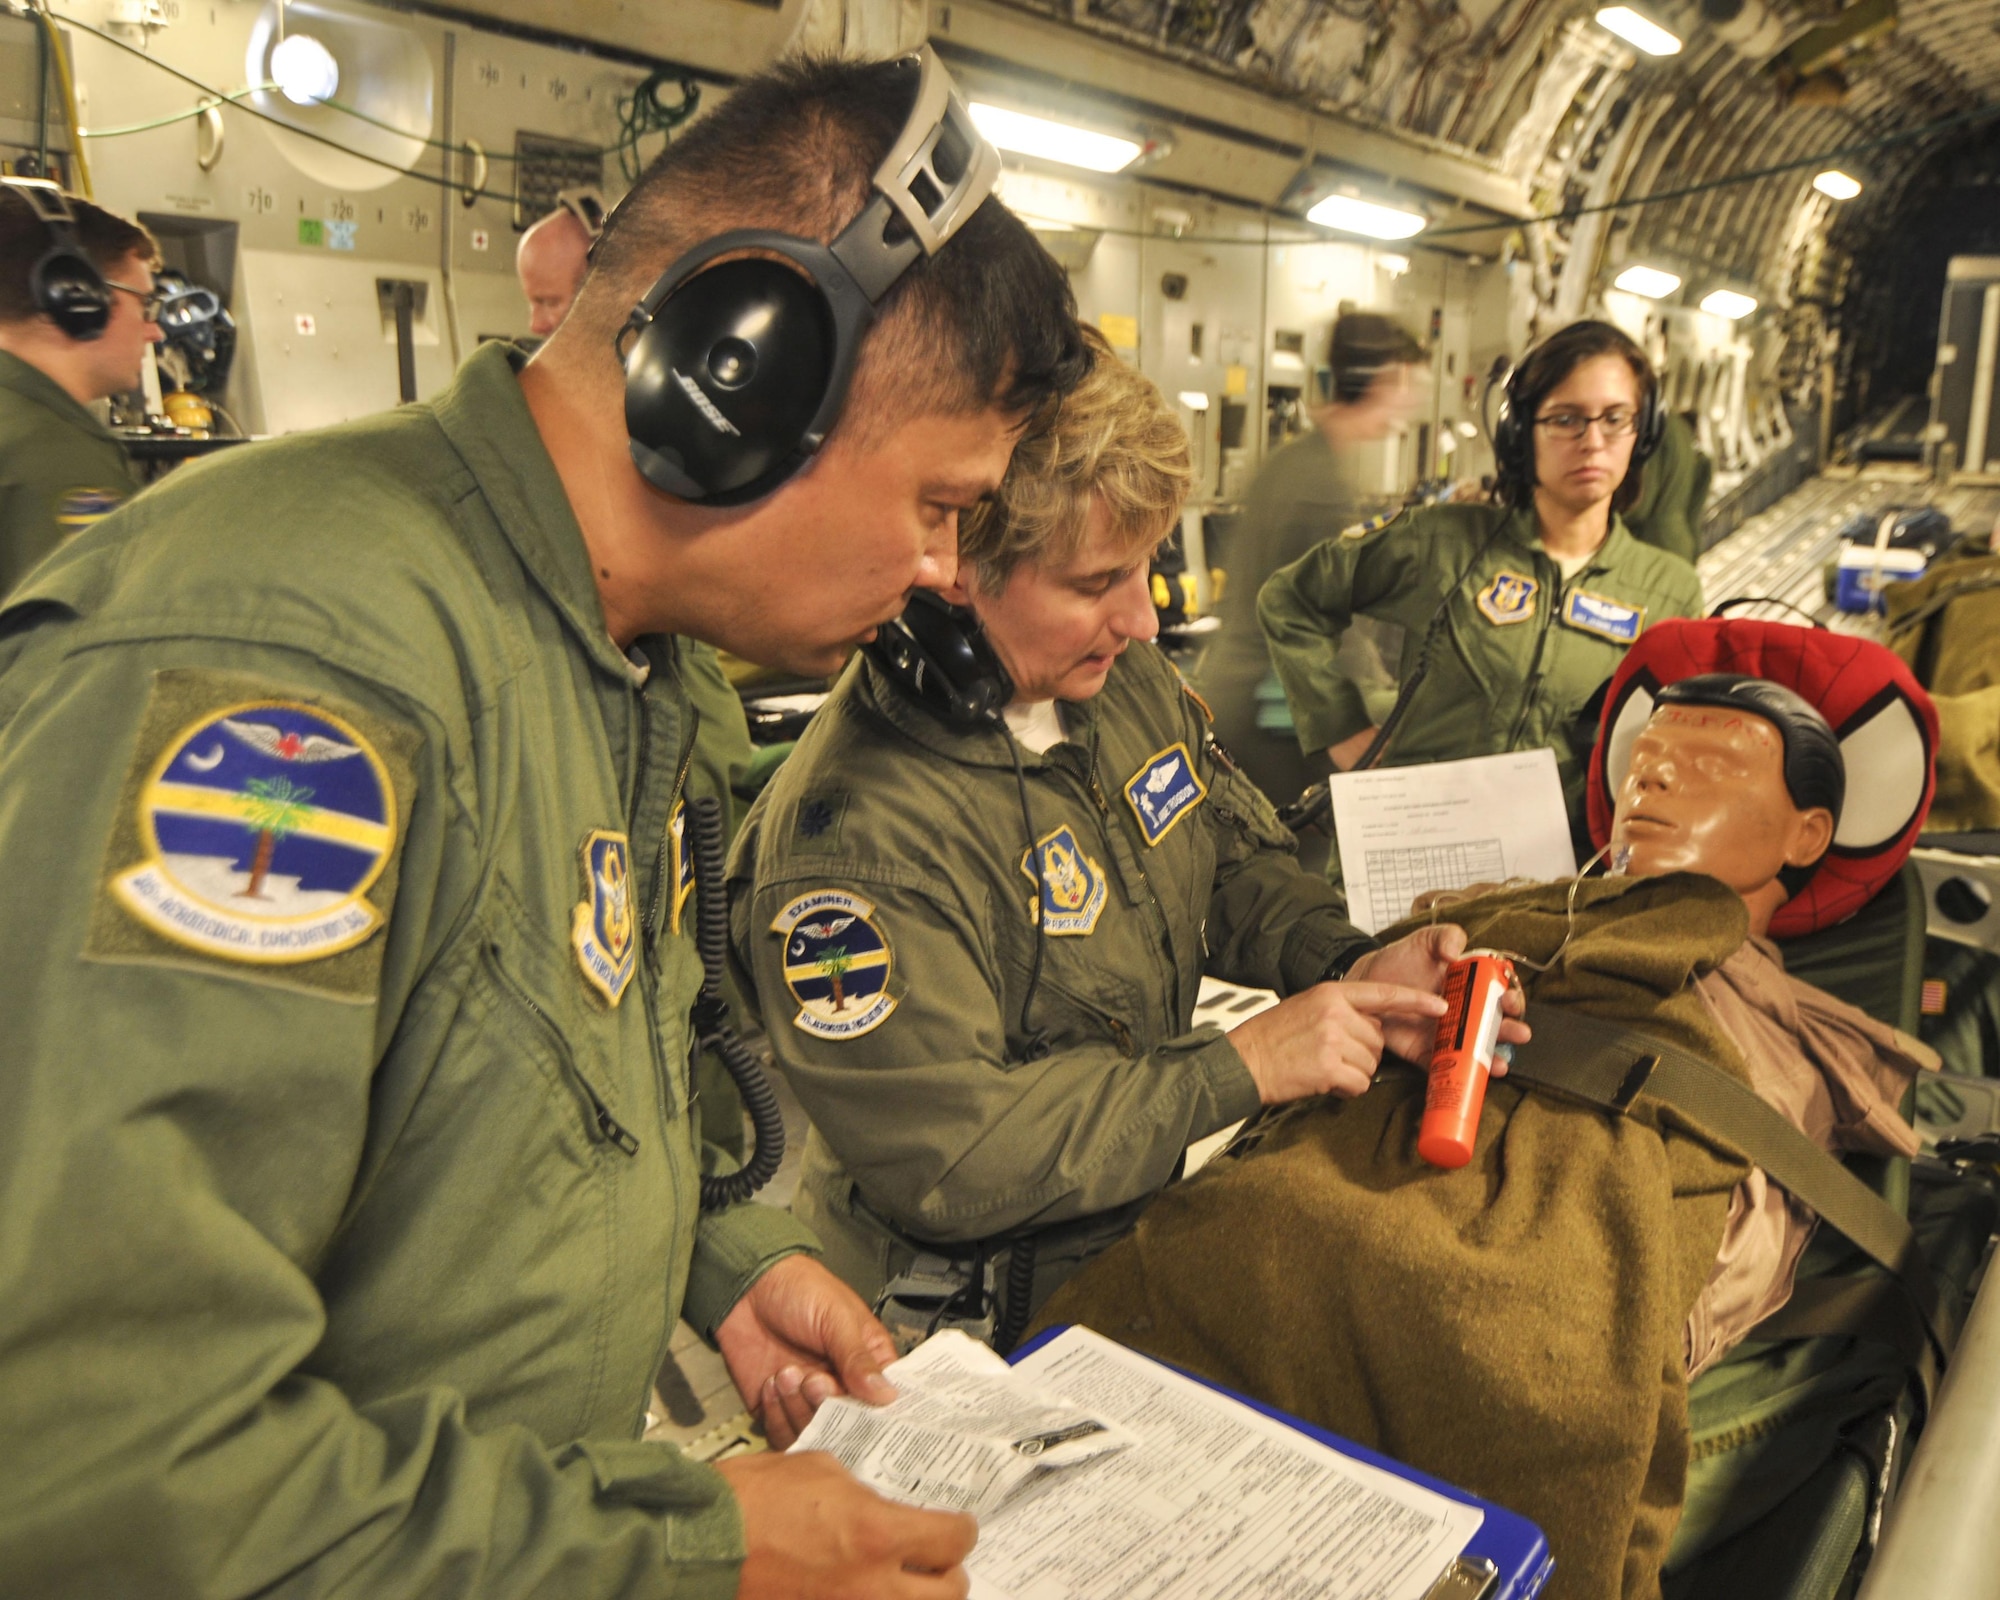 Lt. Col. Angie Trogdon, a flight nurse with 315th Aeromedical Evacuation Squadron at Joint Base Charleston goes over medical procedures with Master Sgt. Robert Jonas on a recent off-station training mission. (U.S. Air Force Photo by Maj. Wayne Capps)